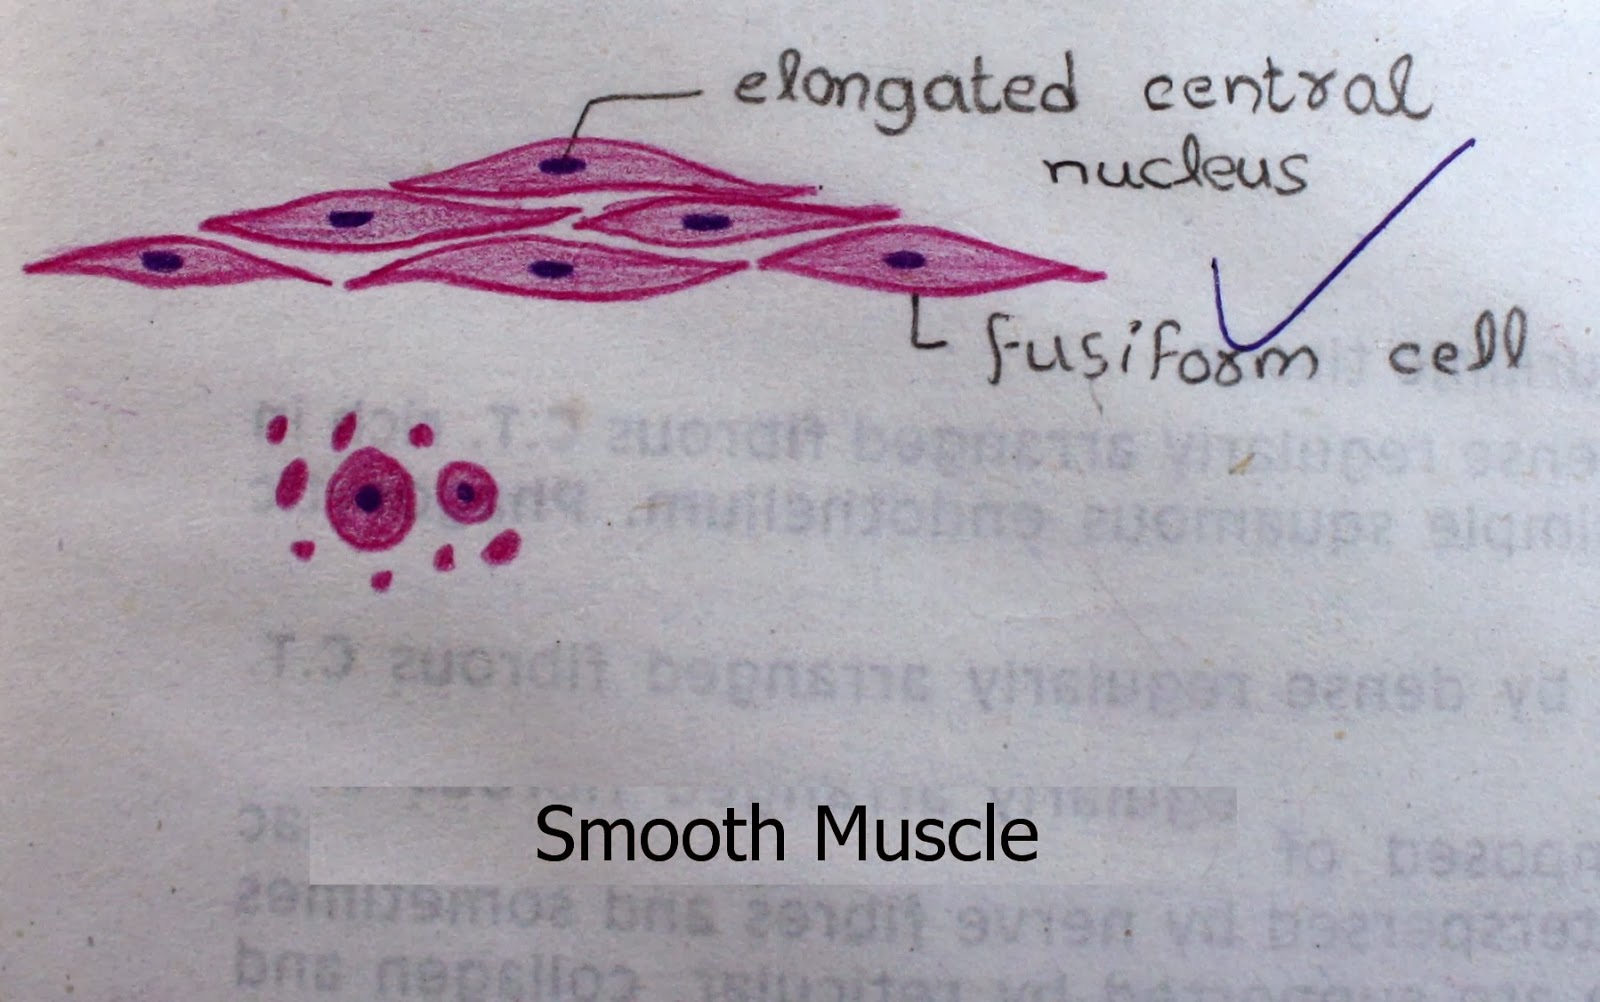 [smooth%2520muscle%2520high%2520resolution%2520histology%2520diagram%255B3%255D.jpg]